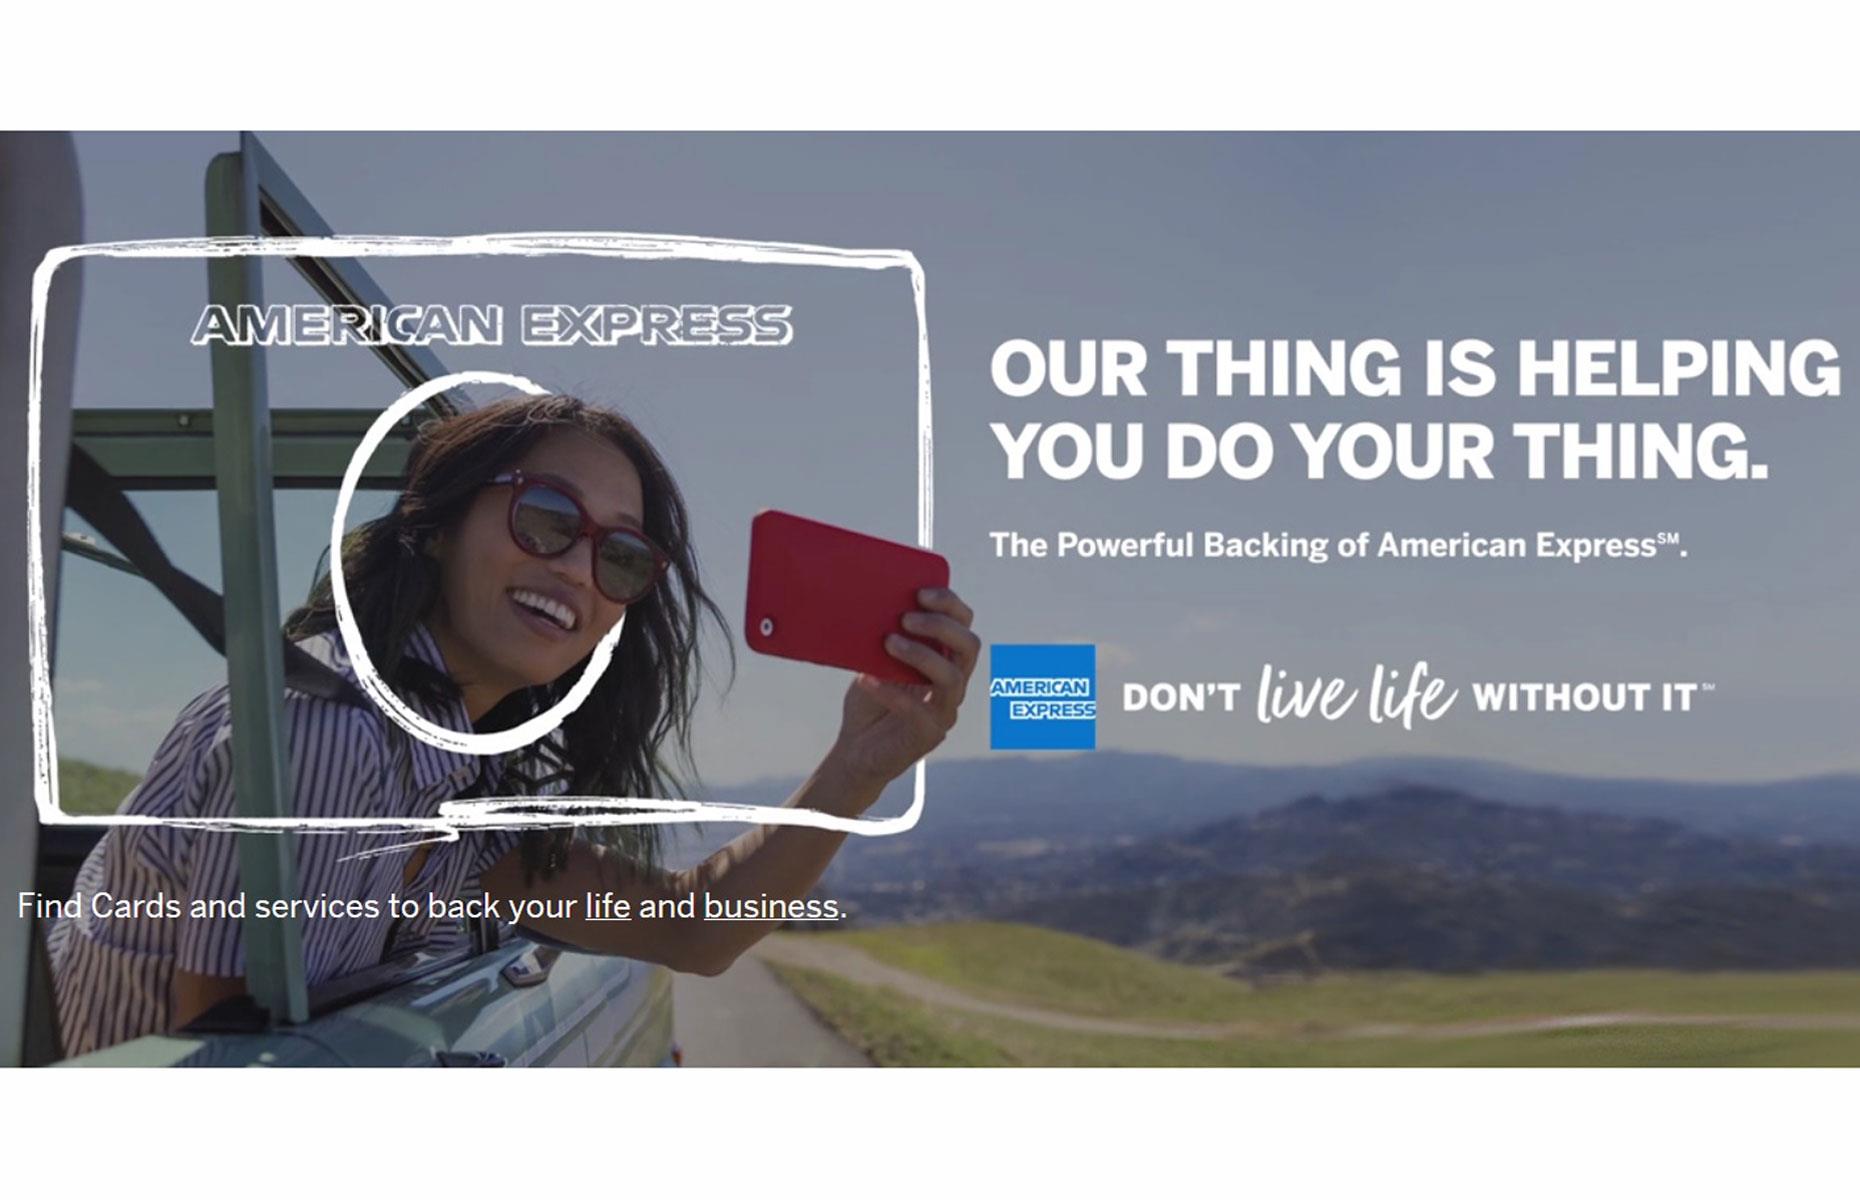 Don't leave home without it – American Express